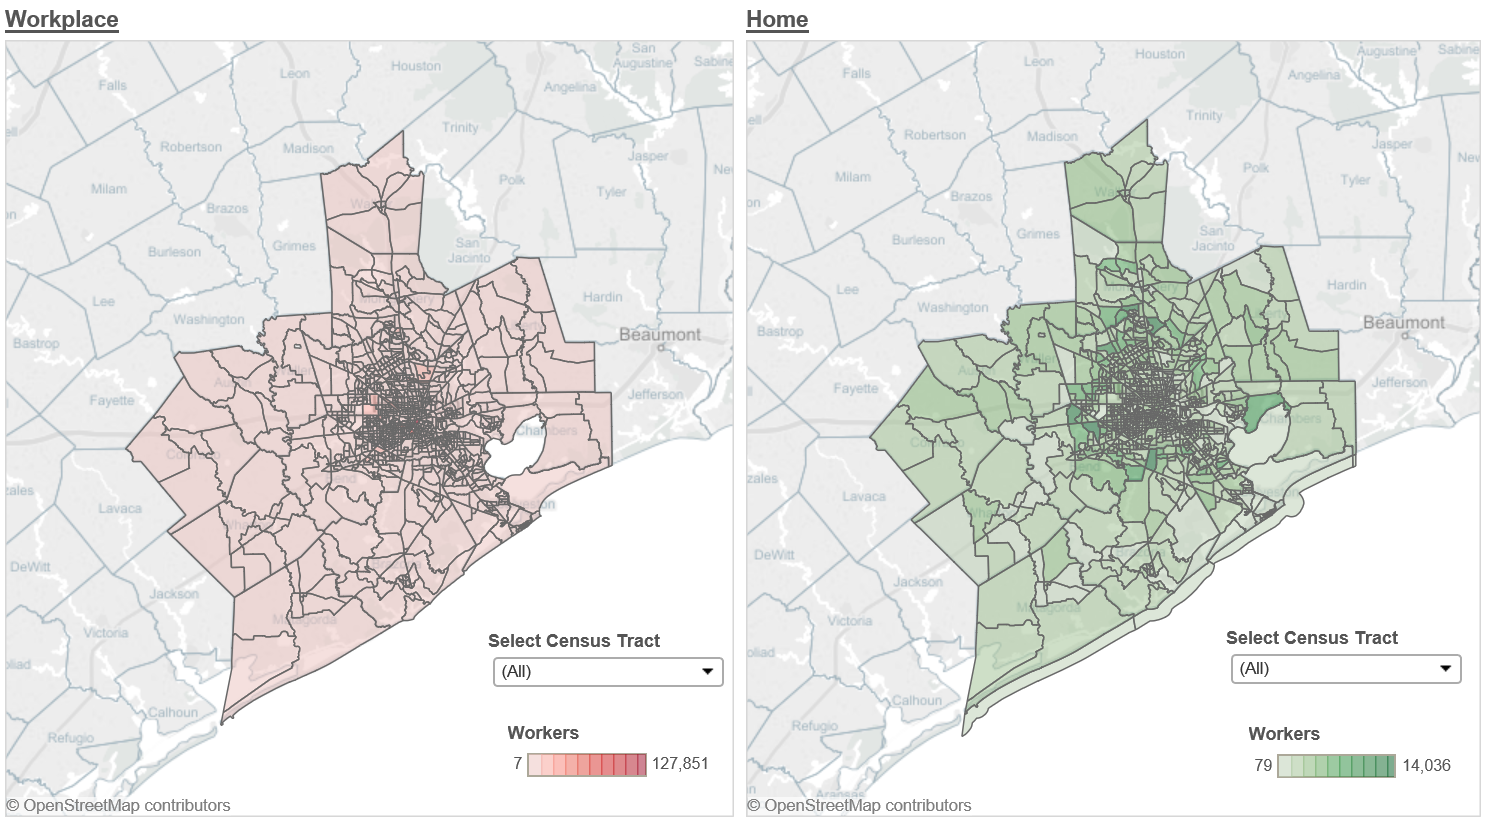 Commuting Patterns based on Census Tracts